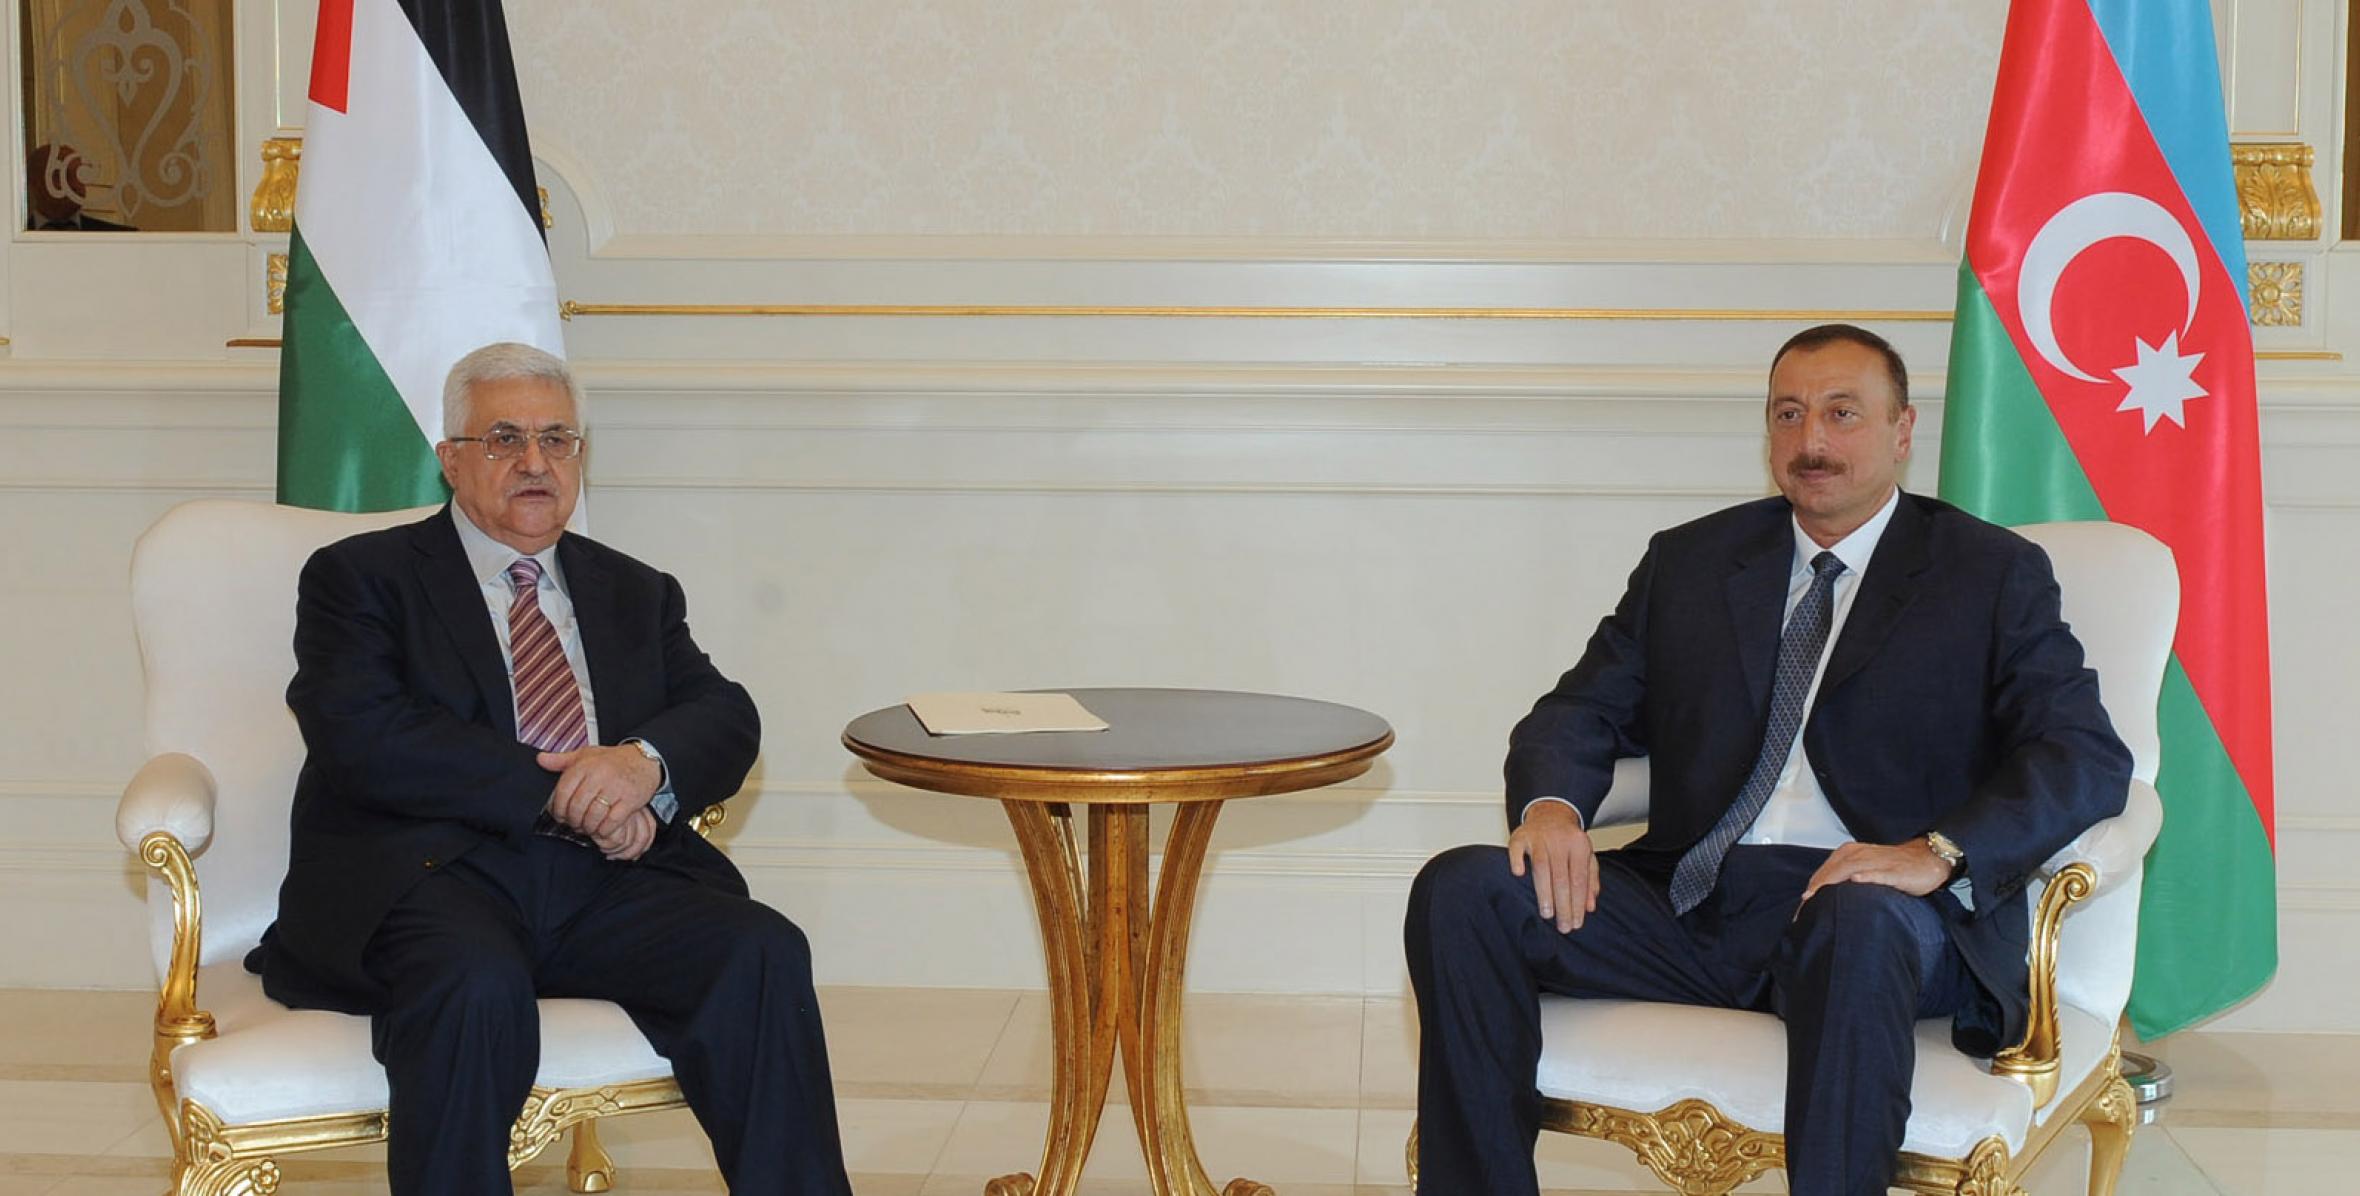 Ilham Aliyev and Palestinian President Mahmoud Abbas held a private meeting